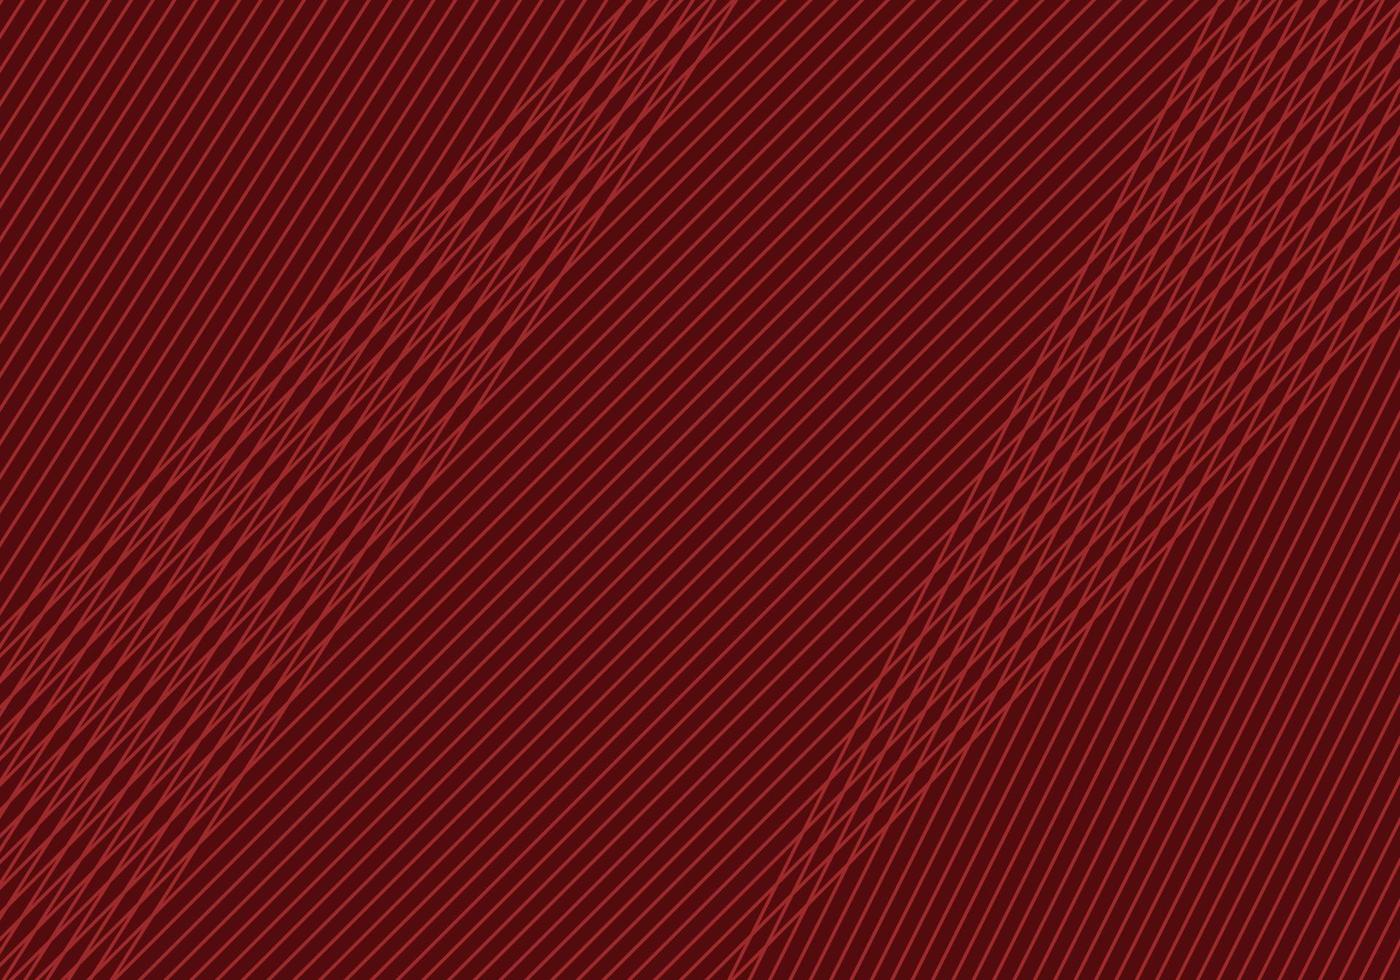 Modern Abstract Background with Dark Red Outline Suitable for Posters, Fyers, Websites, Covers, Banners, Advertising vector